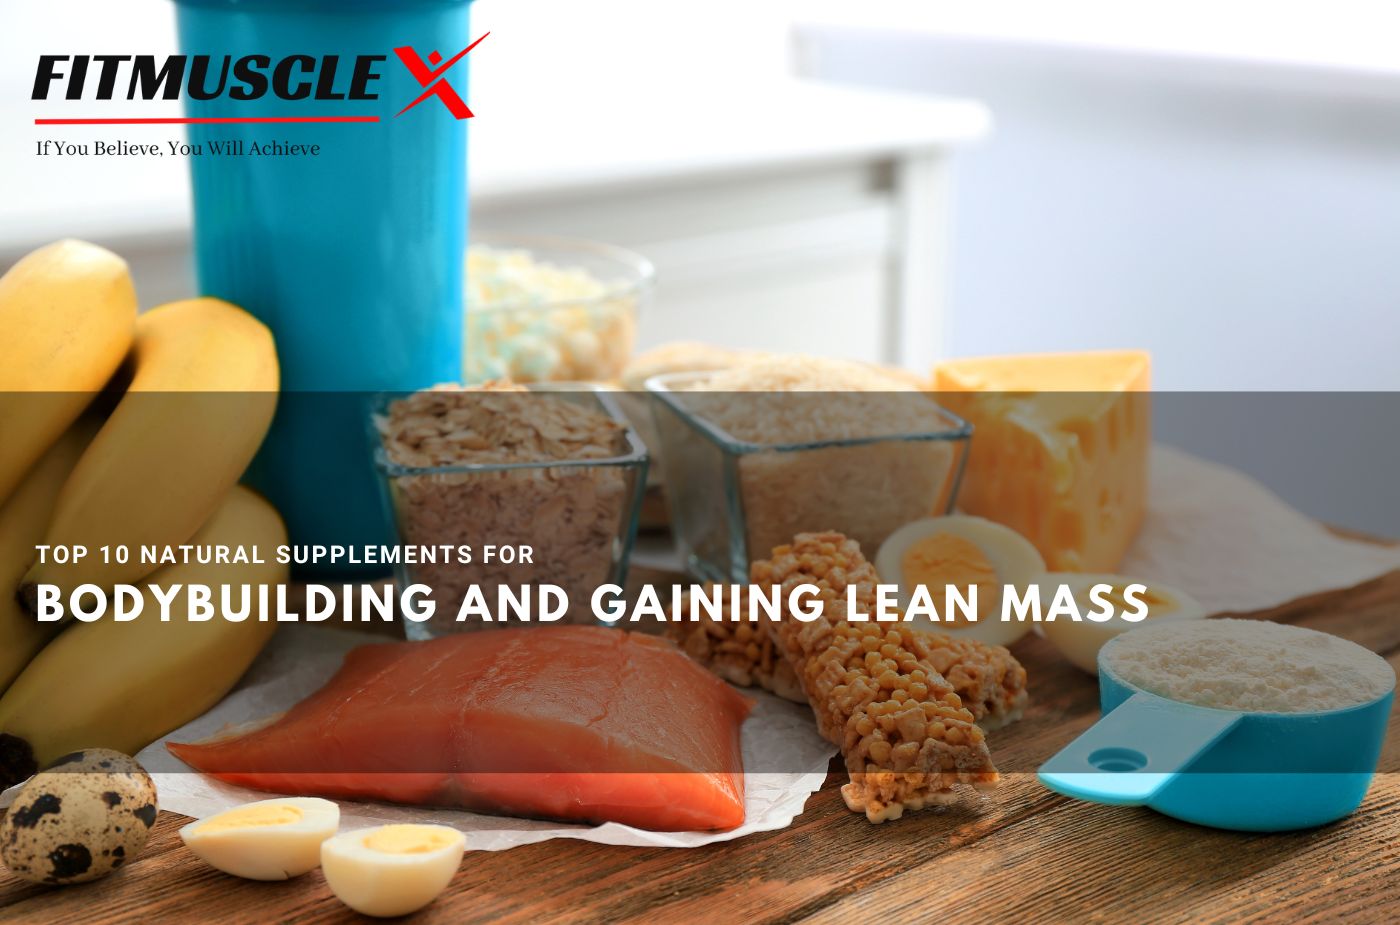 Top 10 Natural Supplements for Bodybuilding and Gaining Lean Mass | FitMuscleX.com